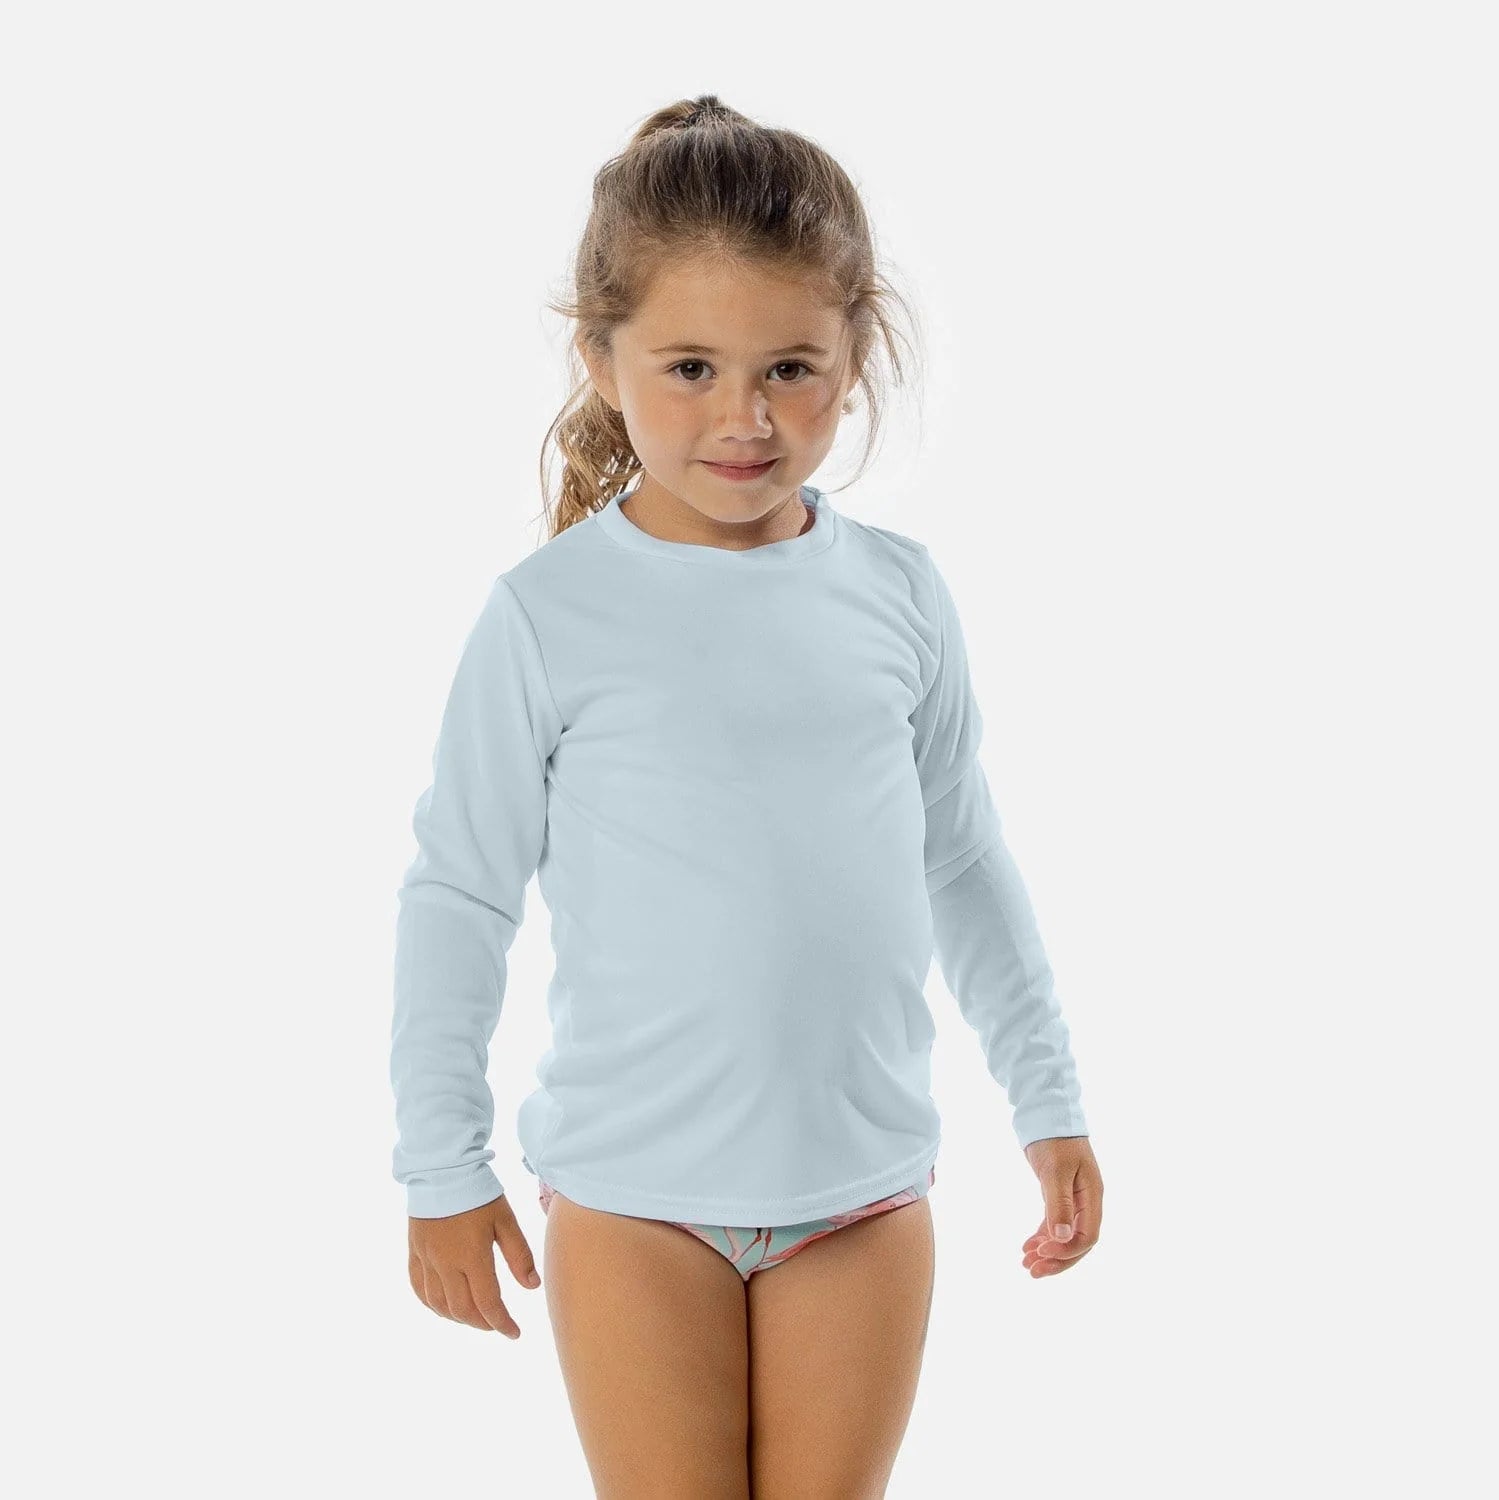 Vapor Apparel Toddler UPF 50+ UV Sun Protection Long Sleeve Performance  T-Shirt for Sports and Outdoor Lifestyle